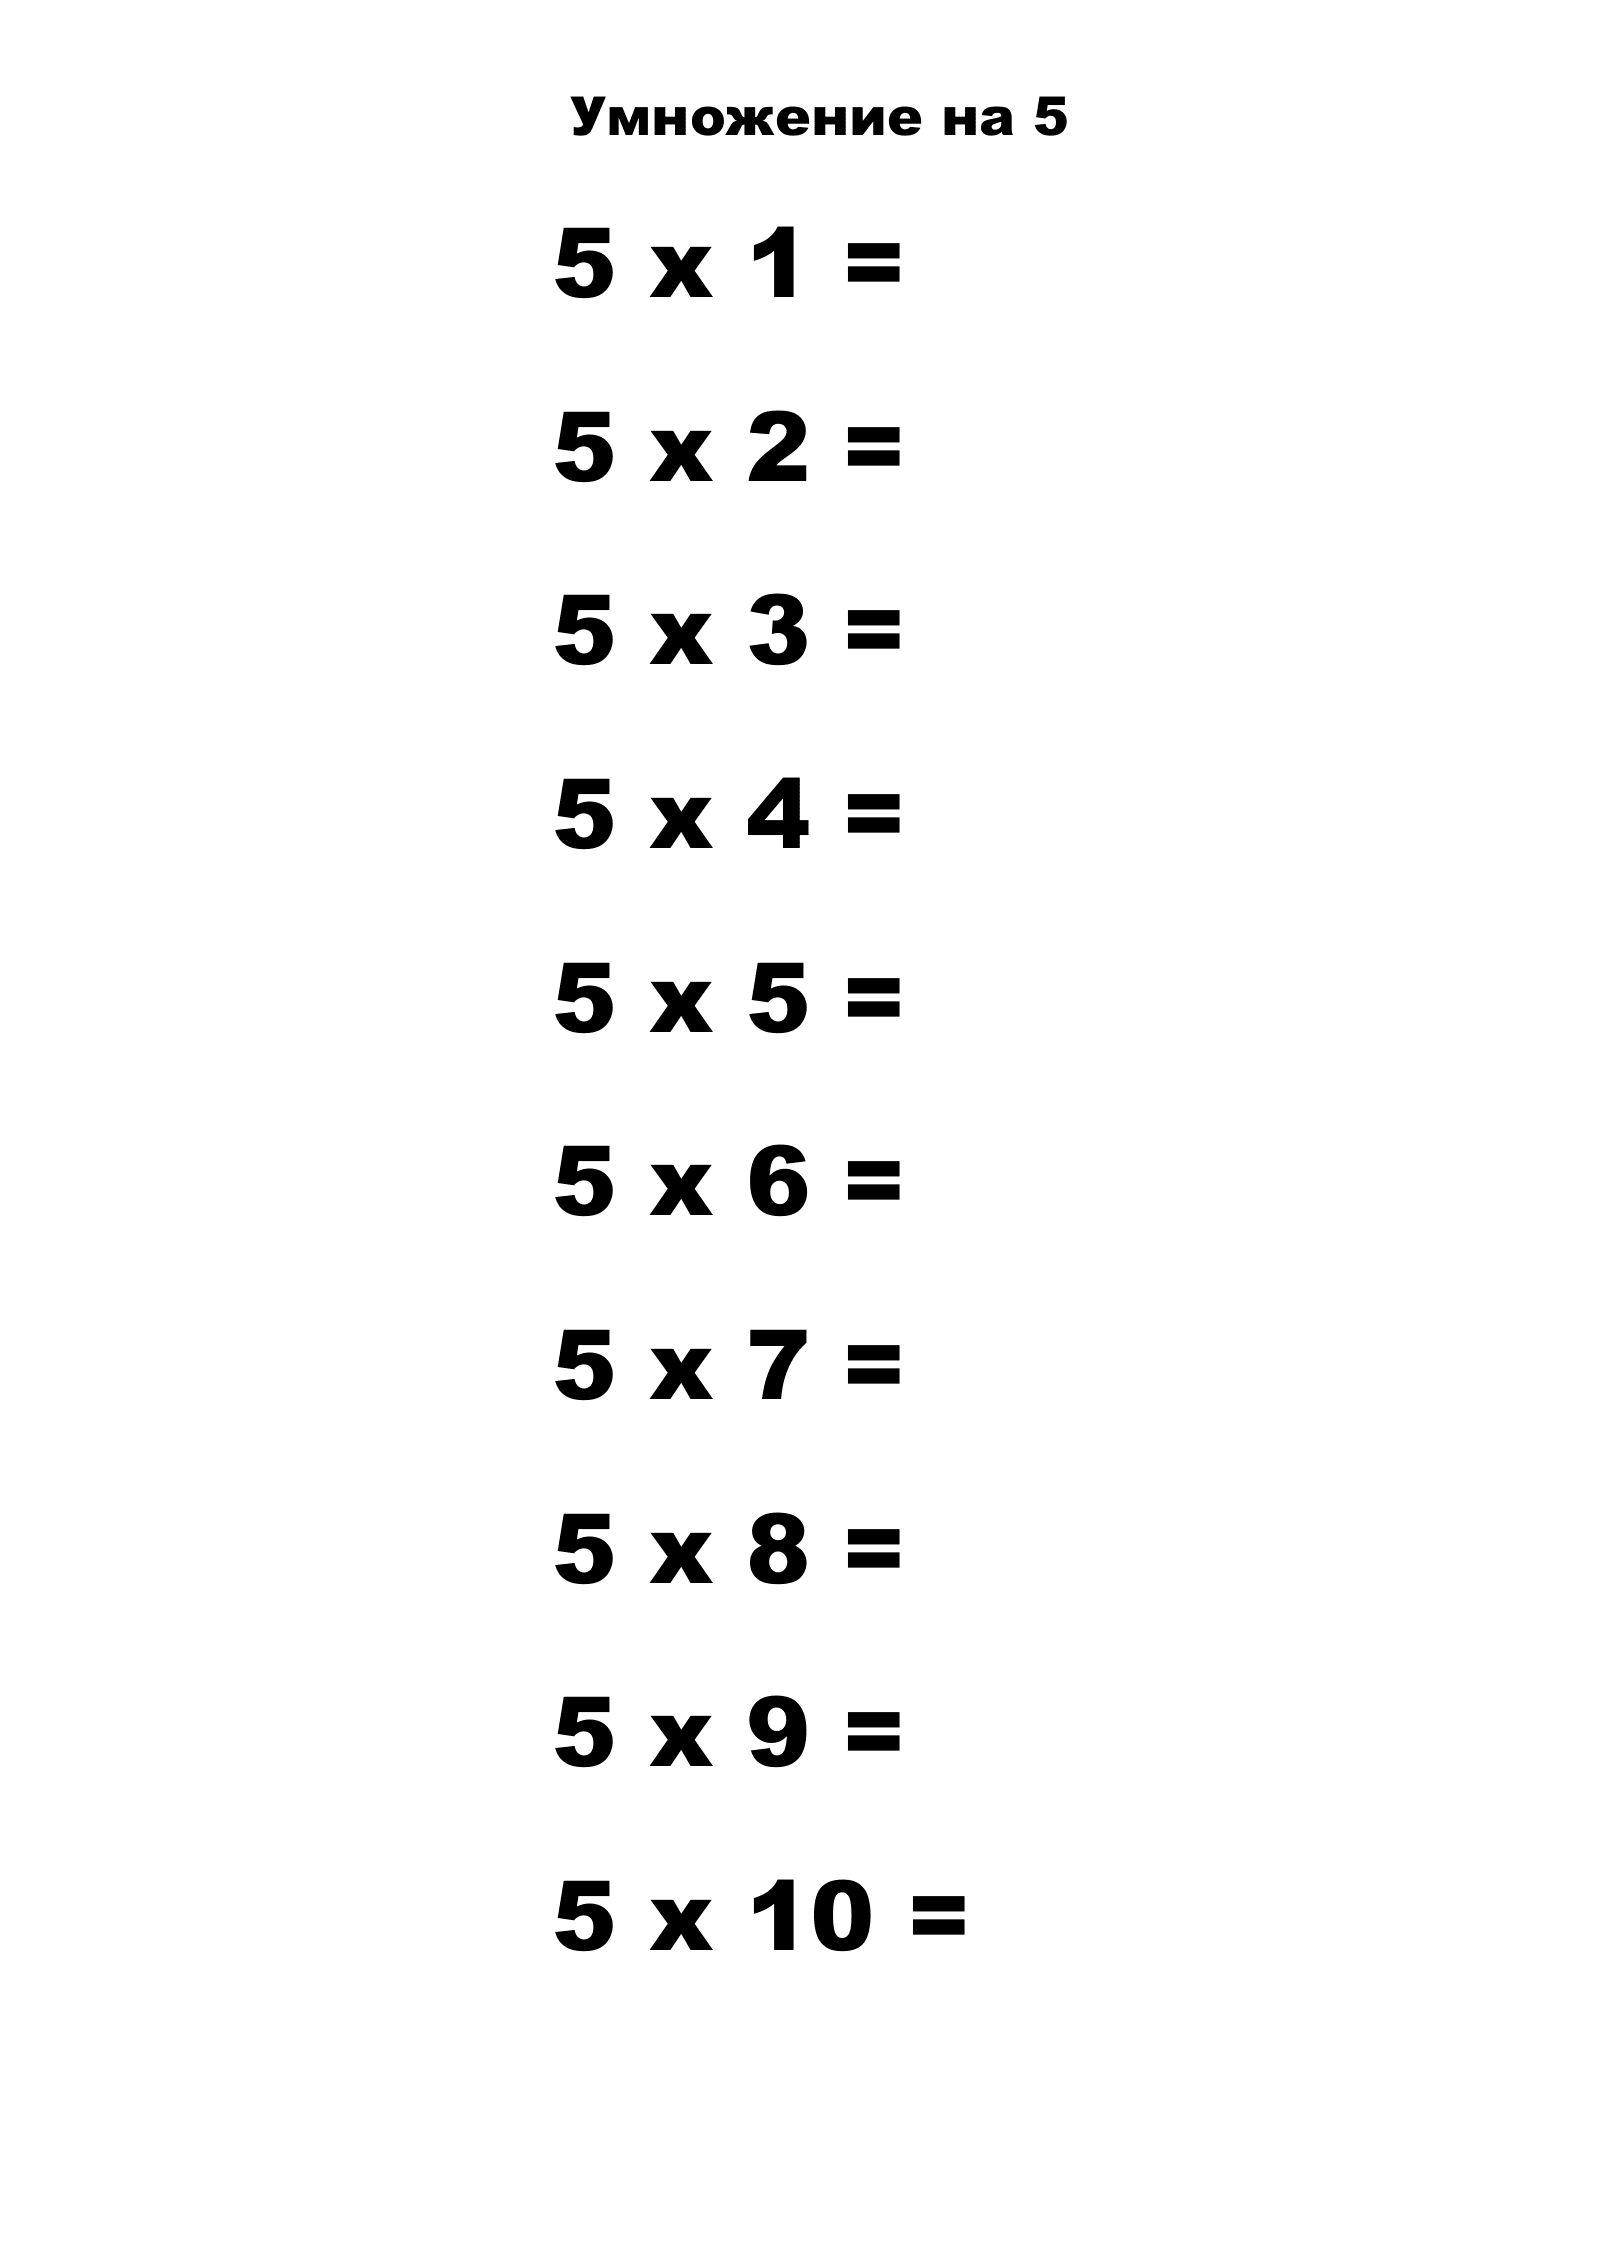 Multiplication Table for 5 Without Answers. Print